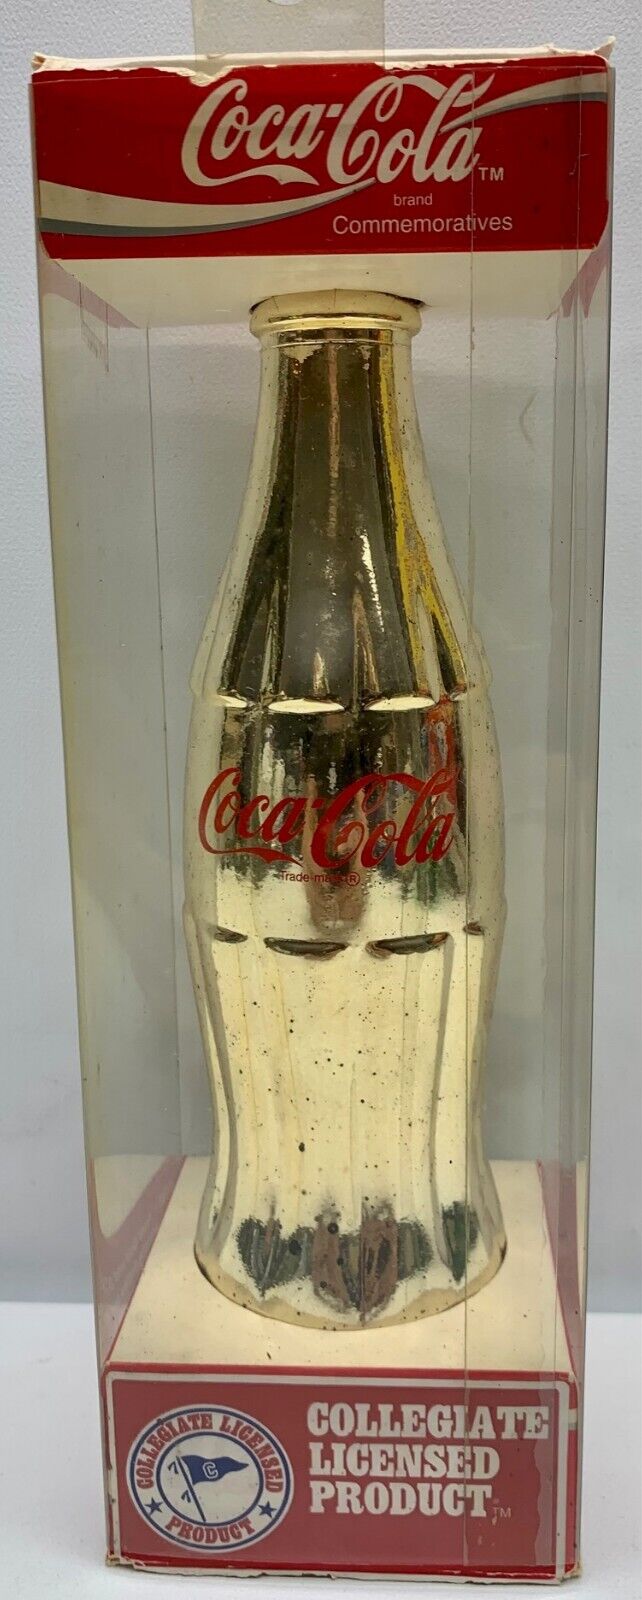 Limited Edition GOLD Coca-Cola Bottle 1894 - 1994 Texas A&M University 100 Year